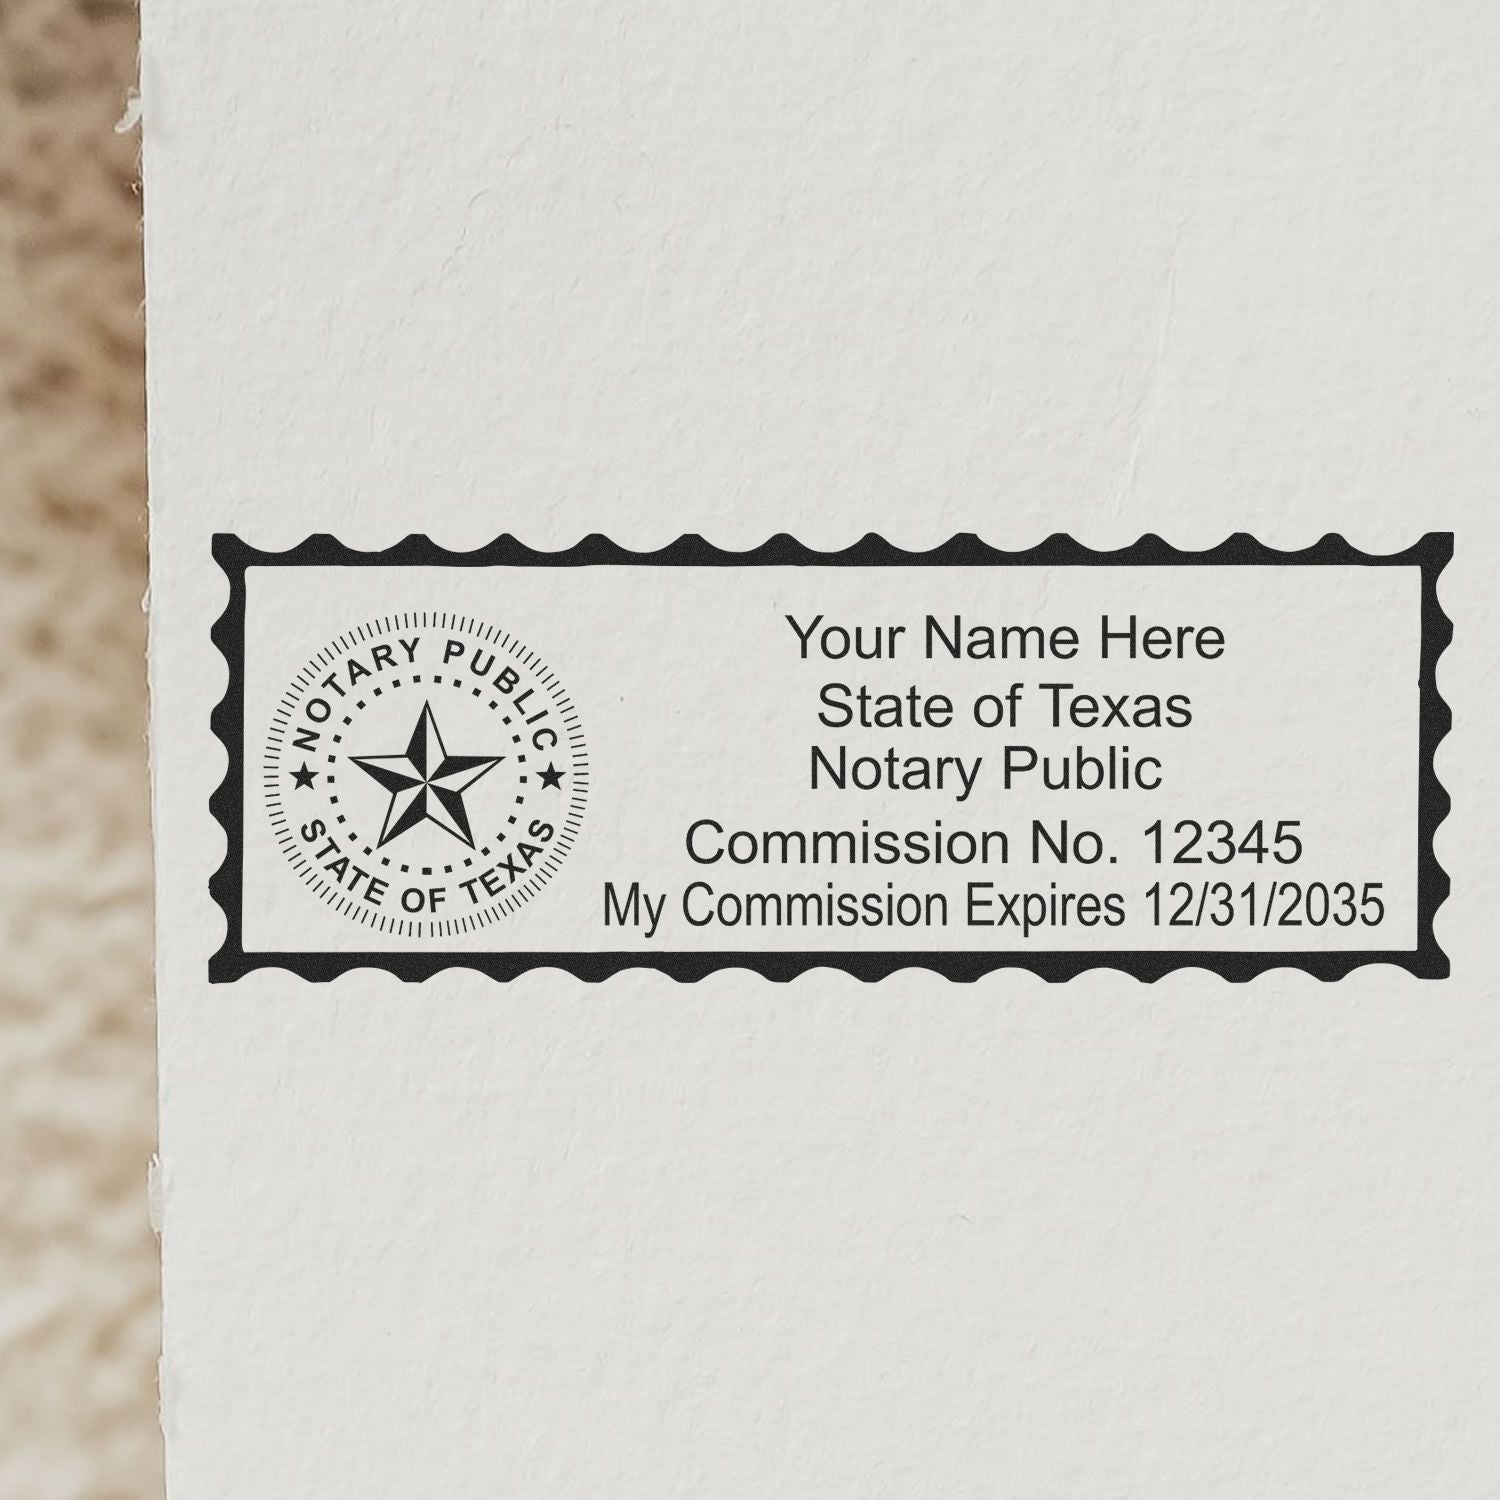 The main image for the Wooden Handle Texas State Seal Notary Public Stamp depicting a sample of the imprint and electronic files